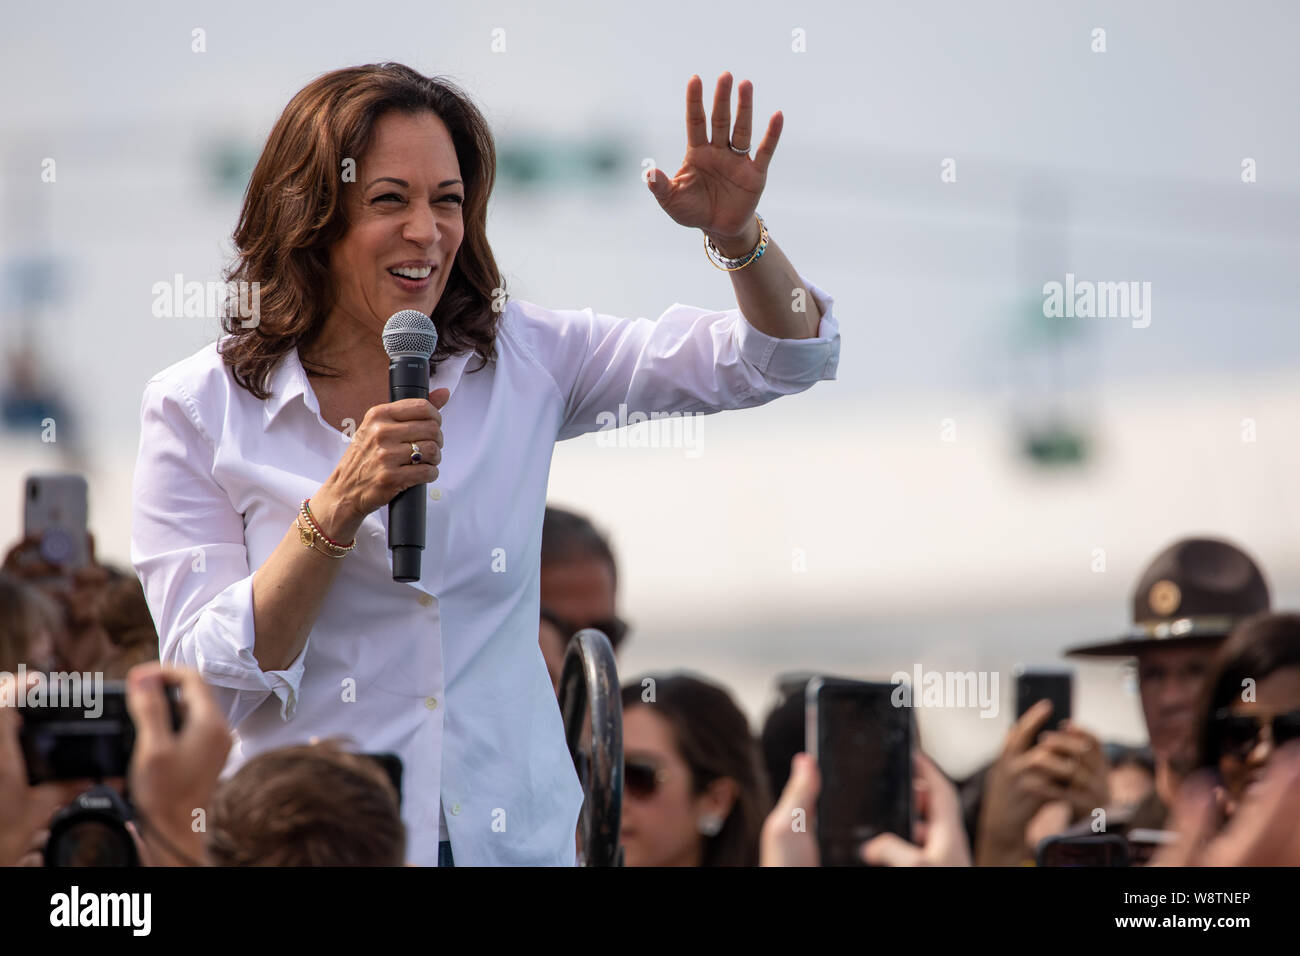 Des Moines, Iowa / USA - August 10, 2019: United States Senator and Democratic presidential candidate Kamala Harris greets supporters at the Iowa Stat Stock Photo